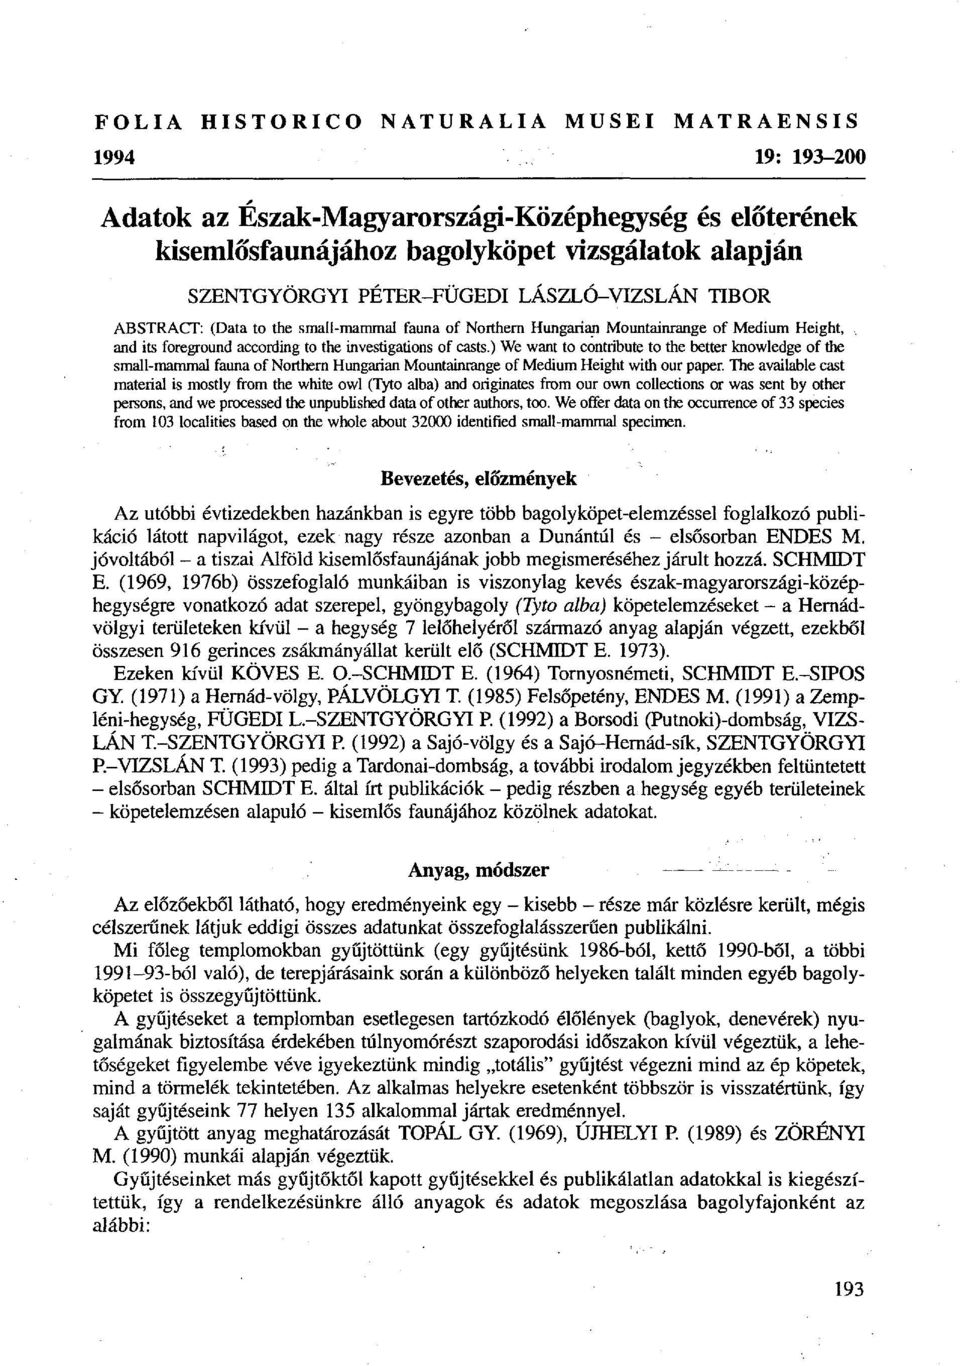 ) We want to contribute to the better knowledge of the small-mammal fauna of Northern Hungarian Mountainrange of Medium Height with our paper.